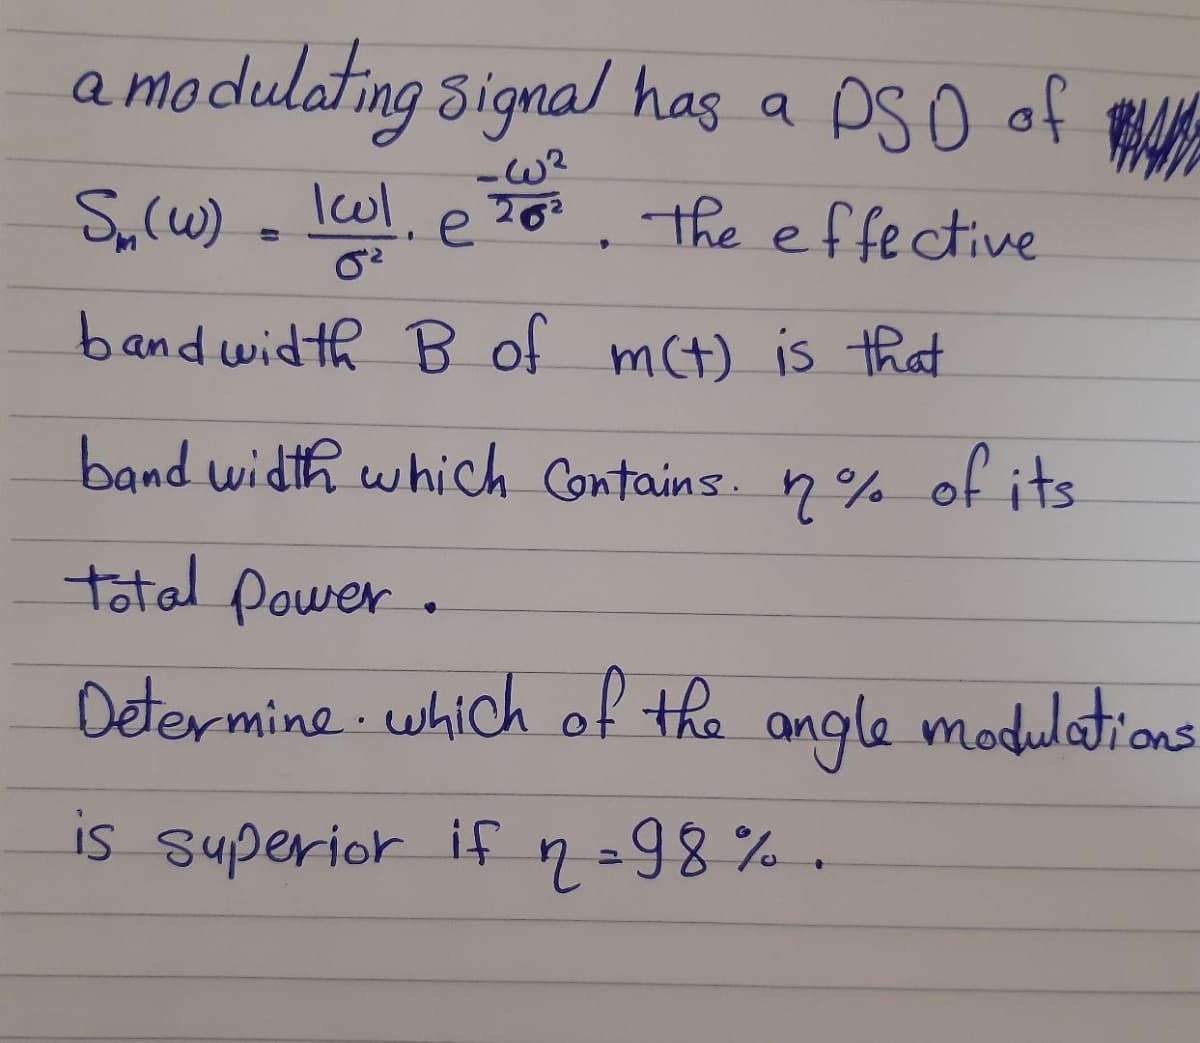 modulating Signal has a PS o of
-w?
S,(w) - lol,
2o3, the effective
e
263
bandwidth B of mct) is that
band width which Contains. n% of its
total power.
Determine which of the angle modulations
is superior ifn=98%
